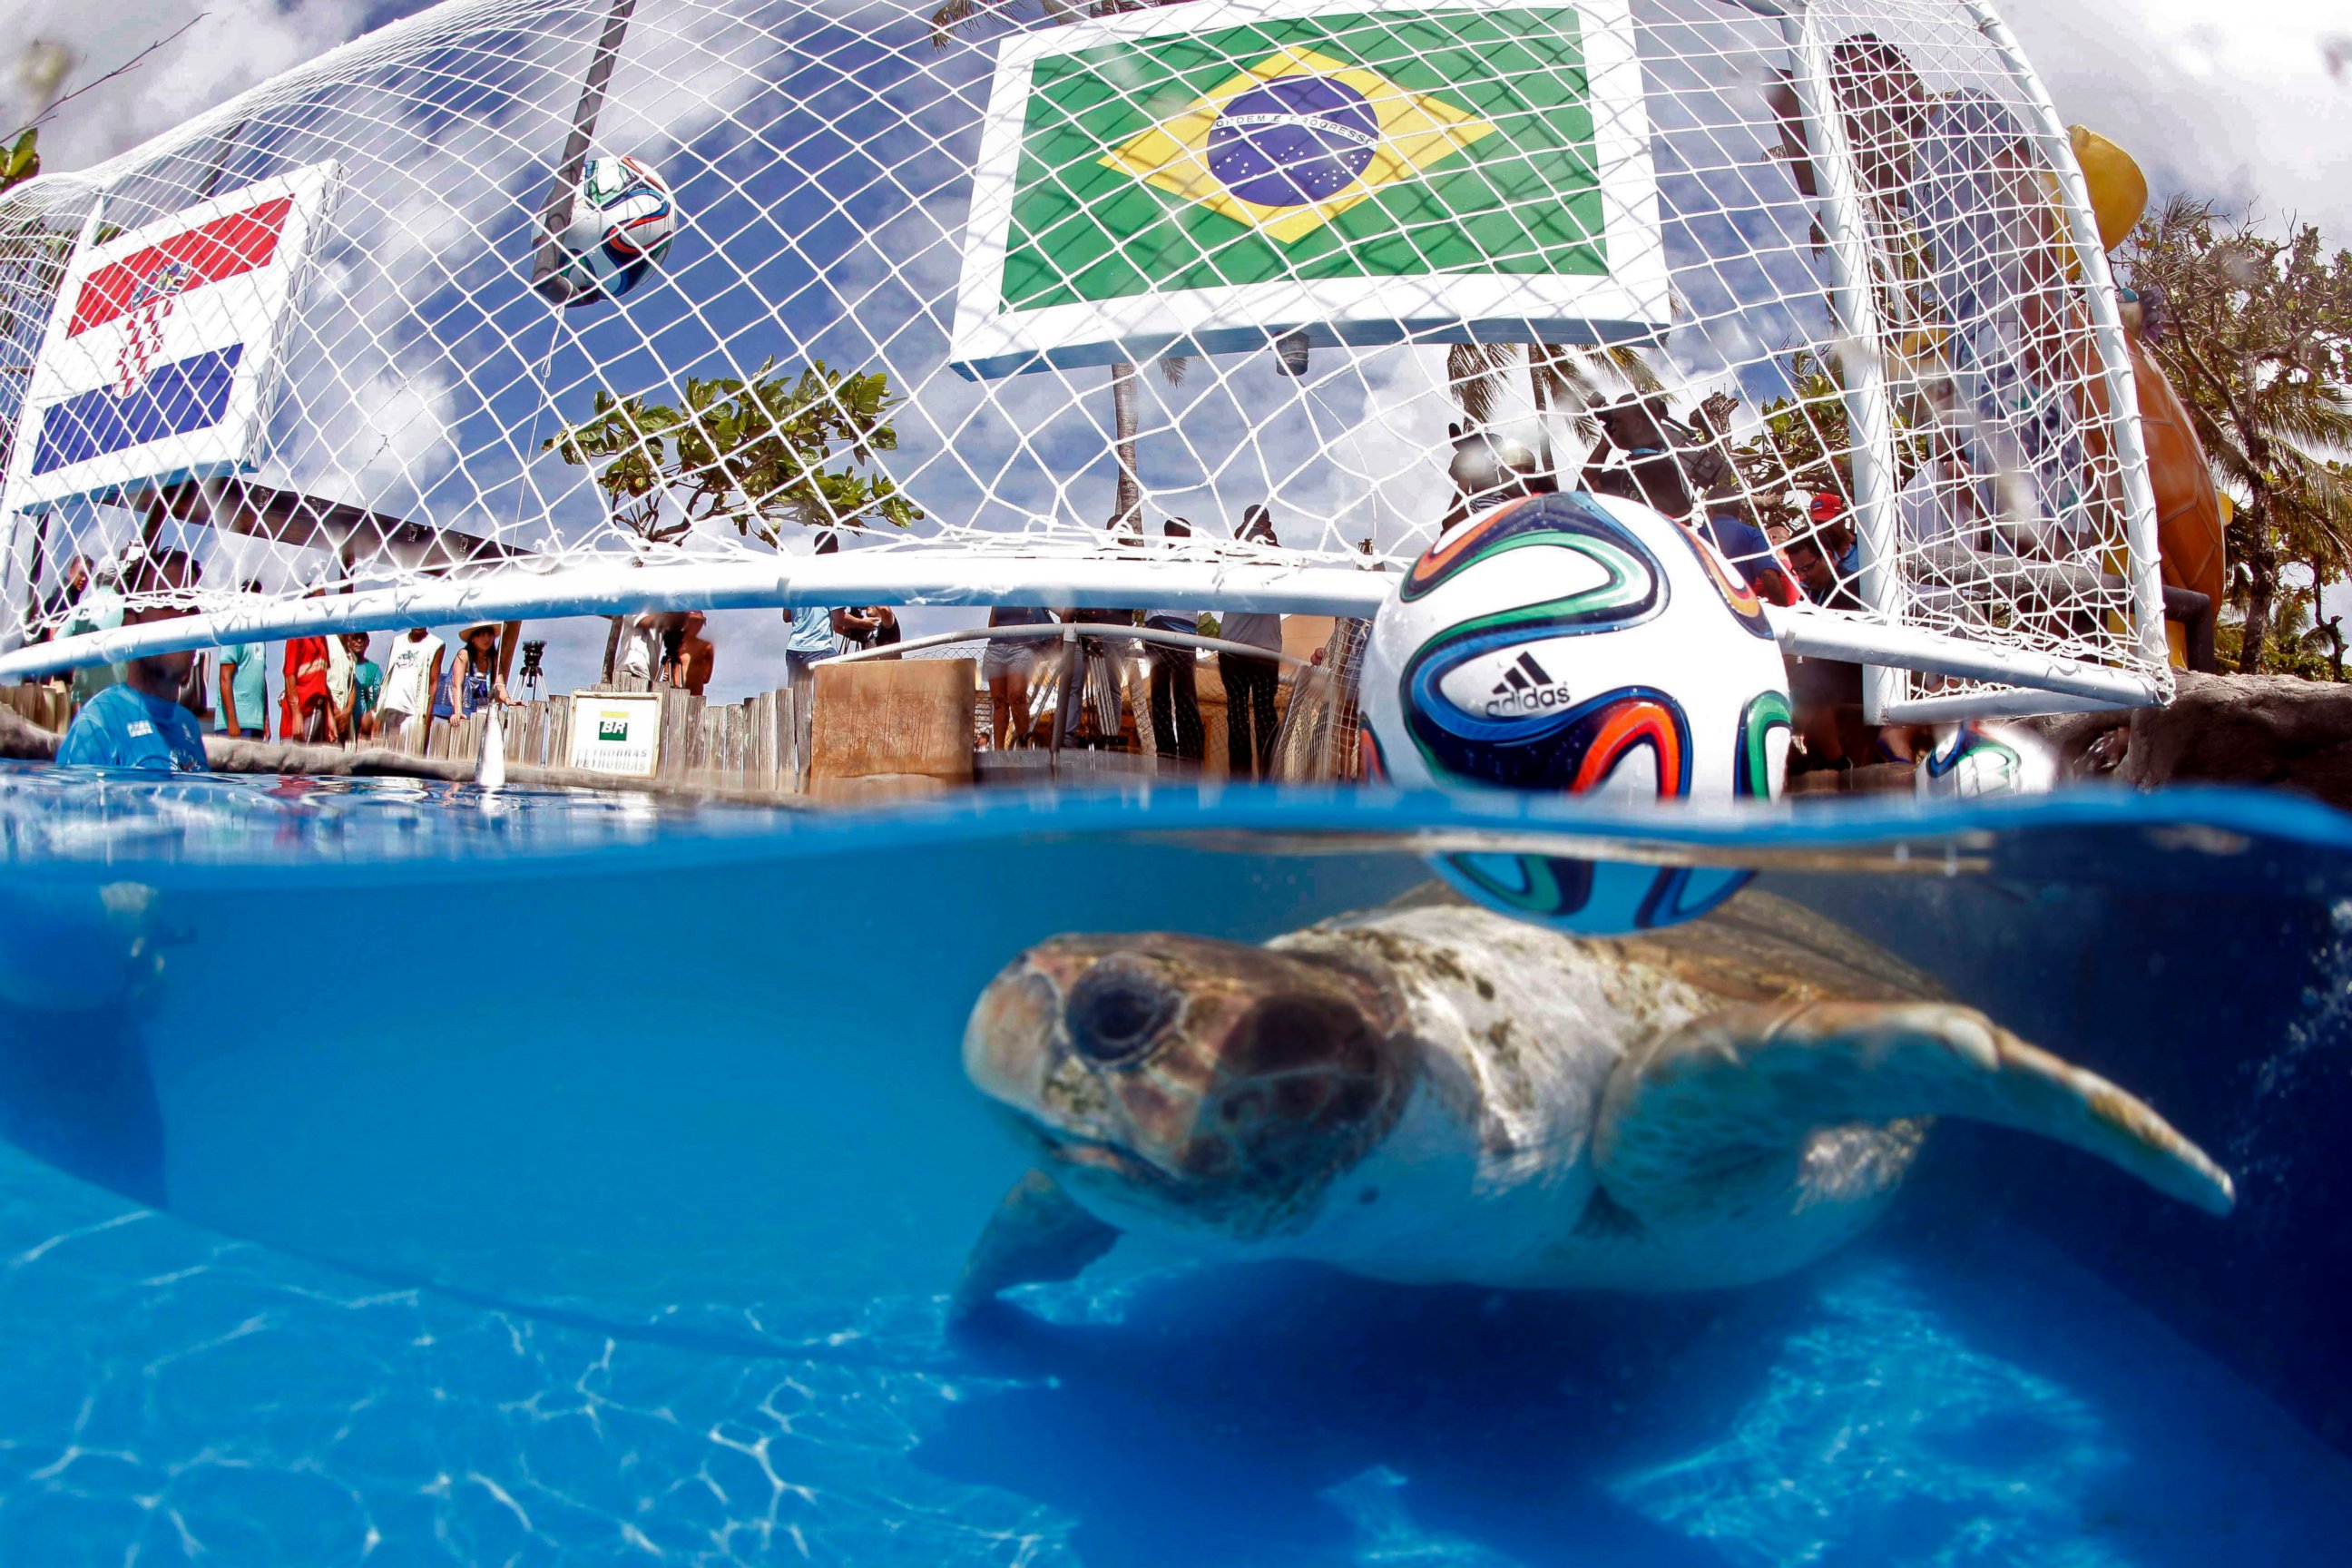 PHOTO: A turtle named "Cabecao," or Big Head, swims in a pool in Praia do Forte, Brazil, June 10, 2014. 